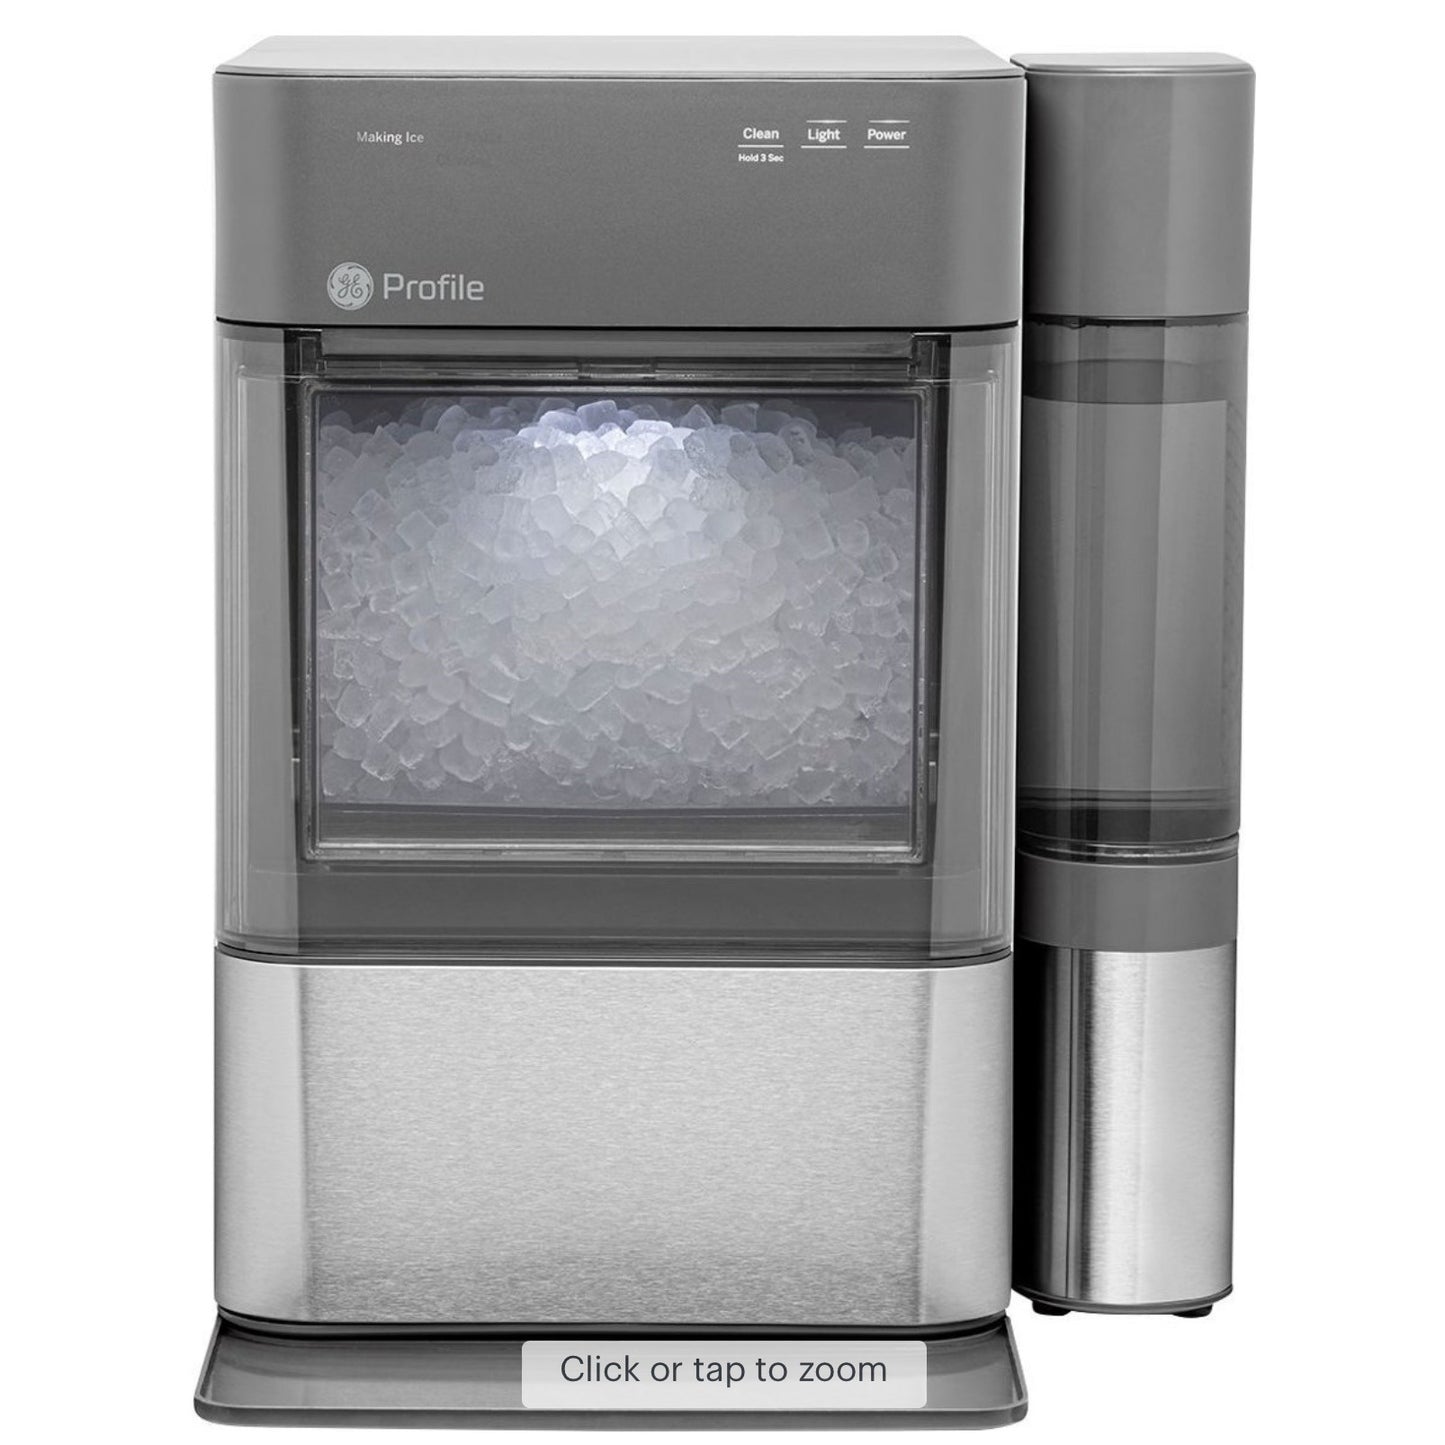 GE Profile opal 2.0 nugget ice maker +side thank